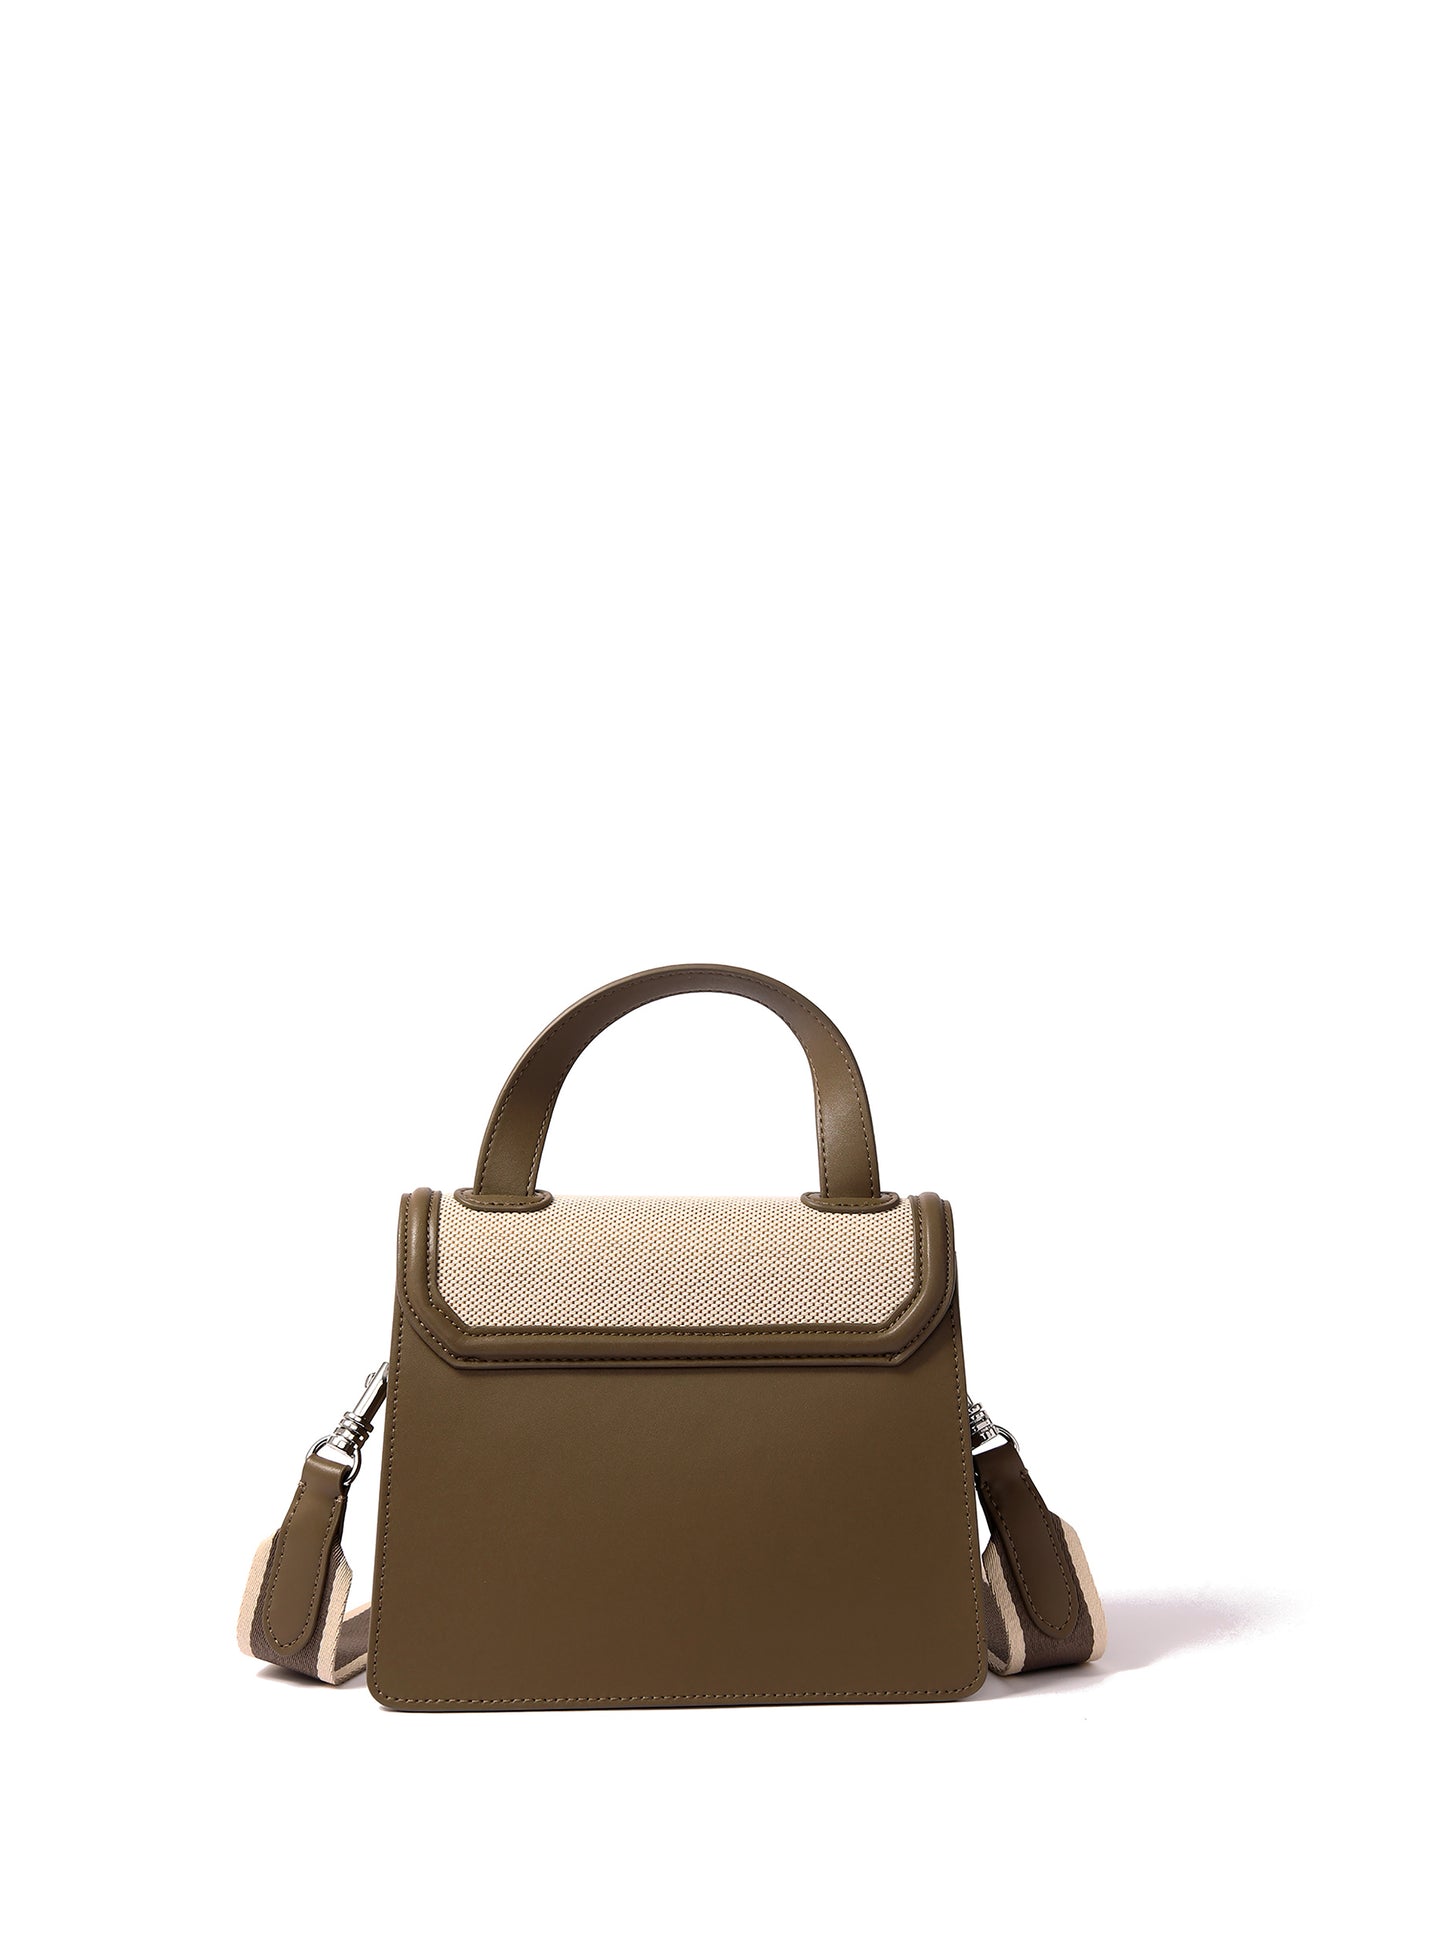 Evelyn Bag in Canvas and Genuine Leather, Gray